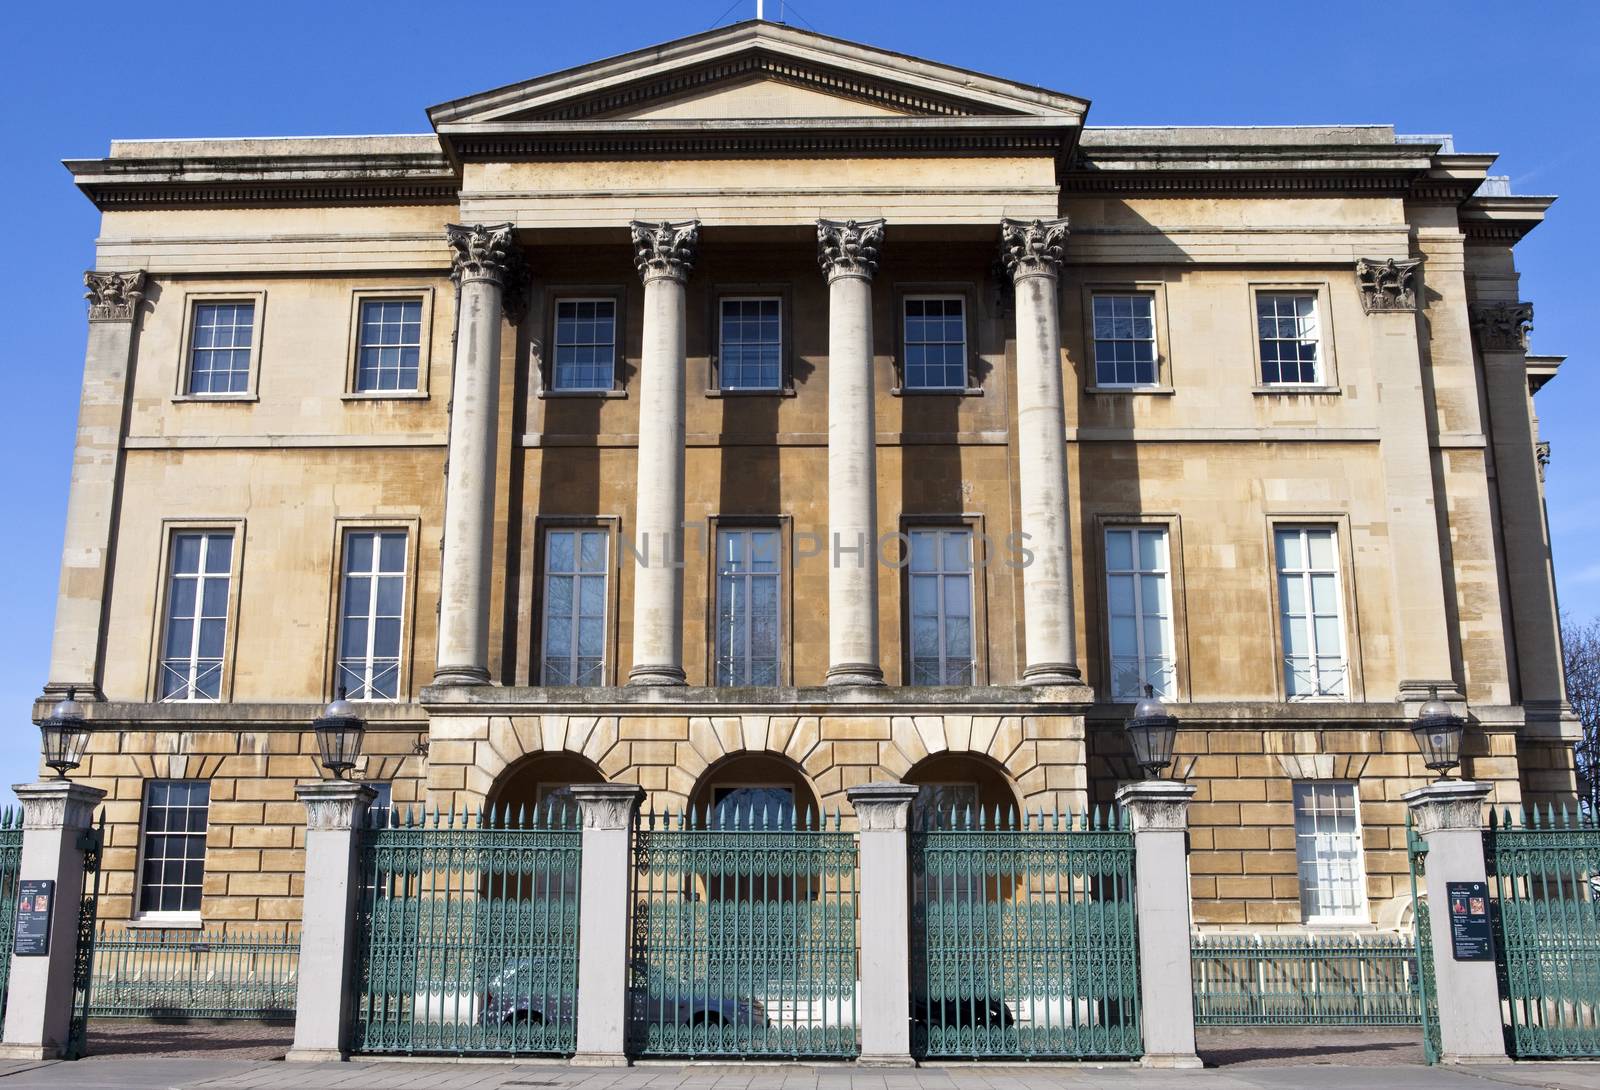 The magnificent Apsley House (also known as the Wellington Museum) in London.